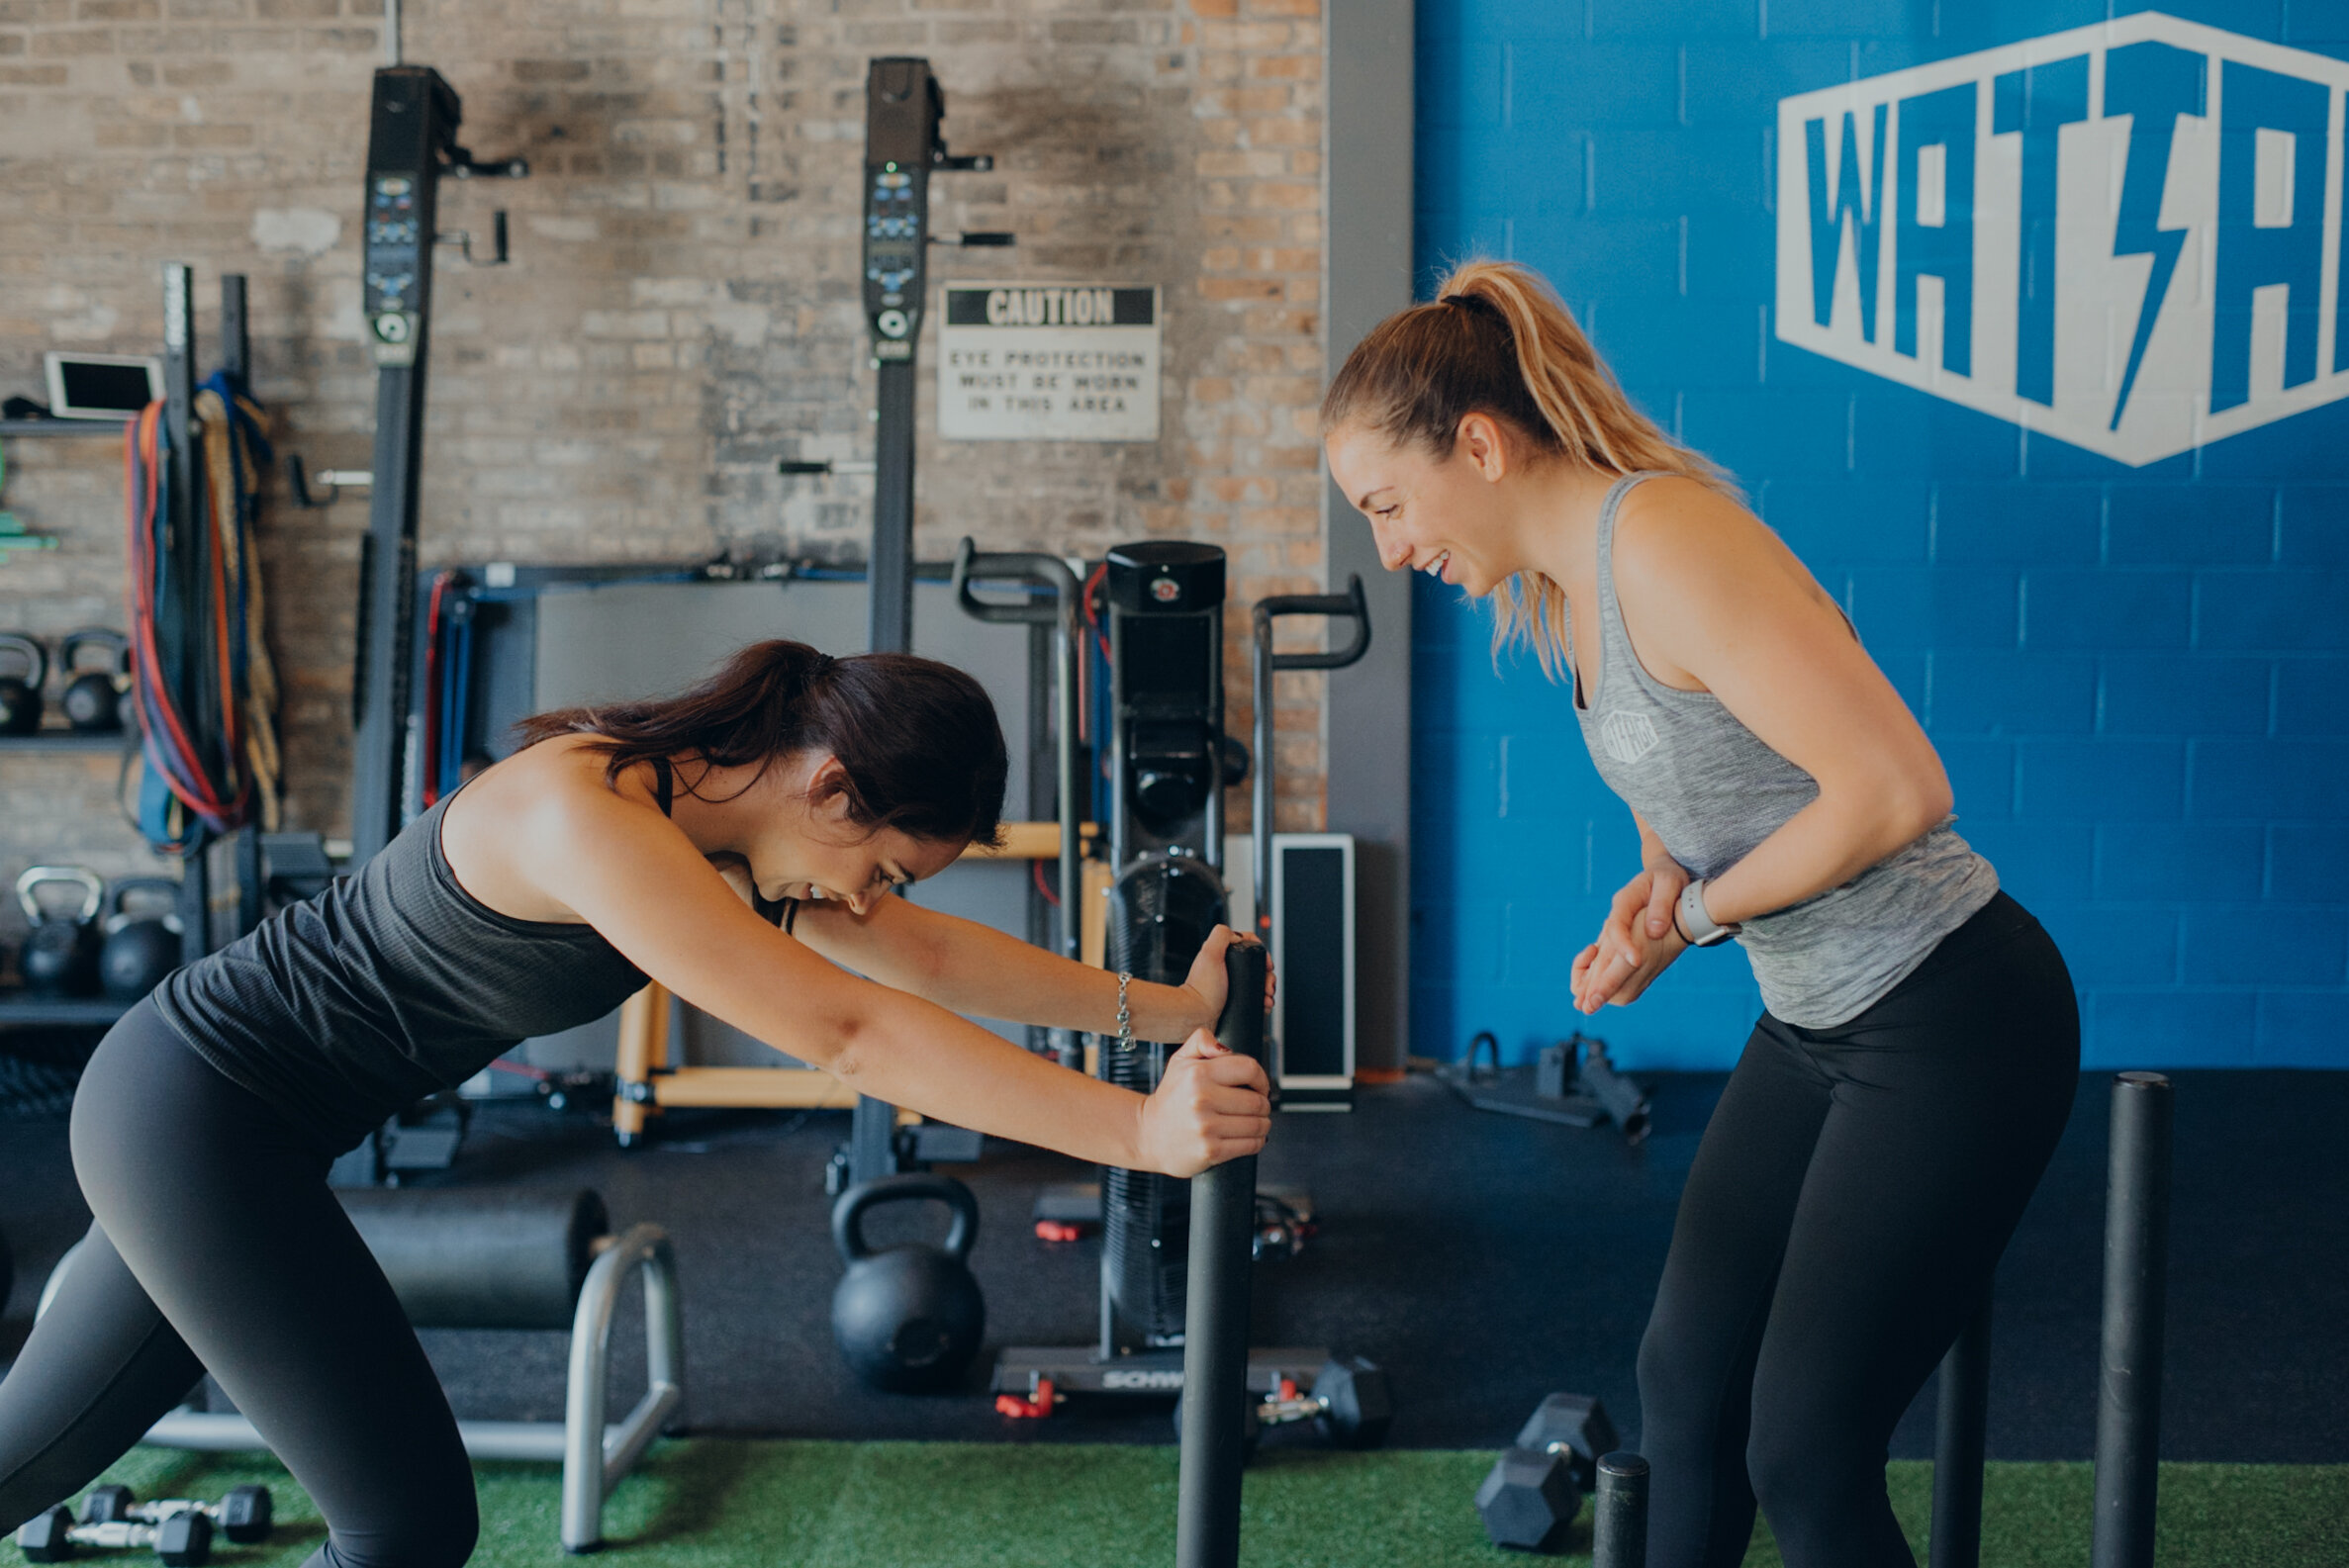 Tour the gym — Wattage - West Loop Personal Training